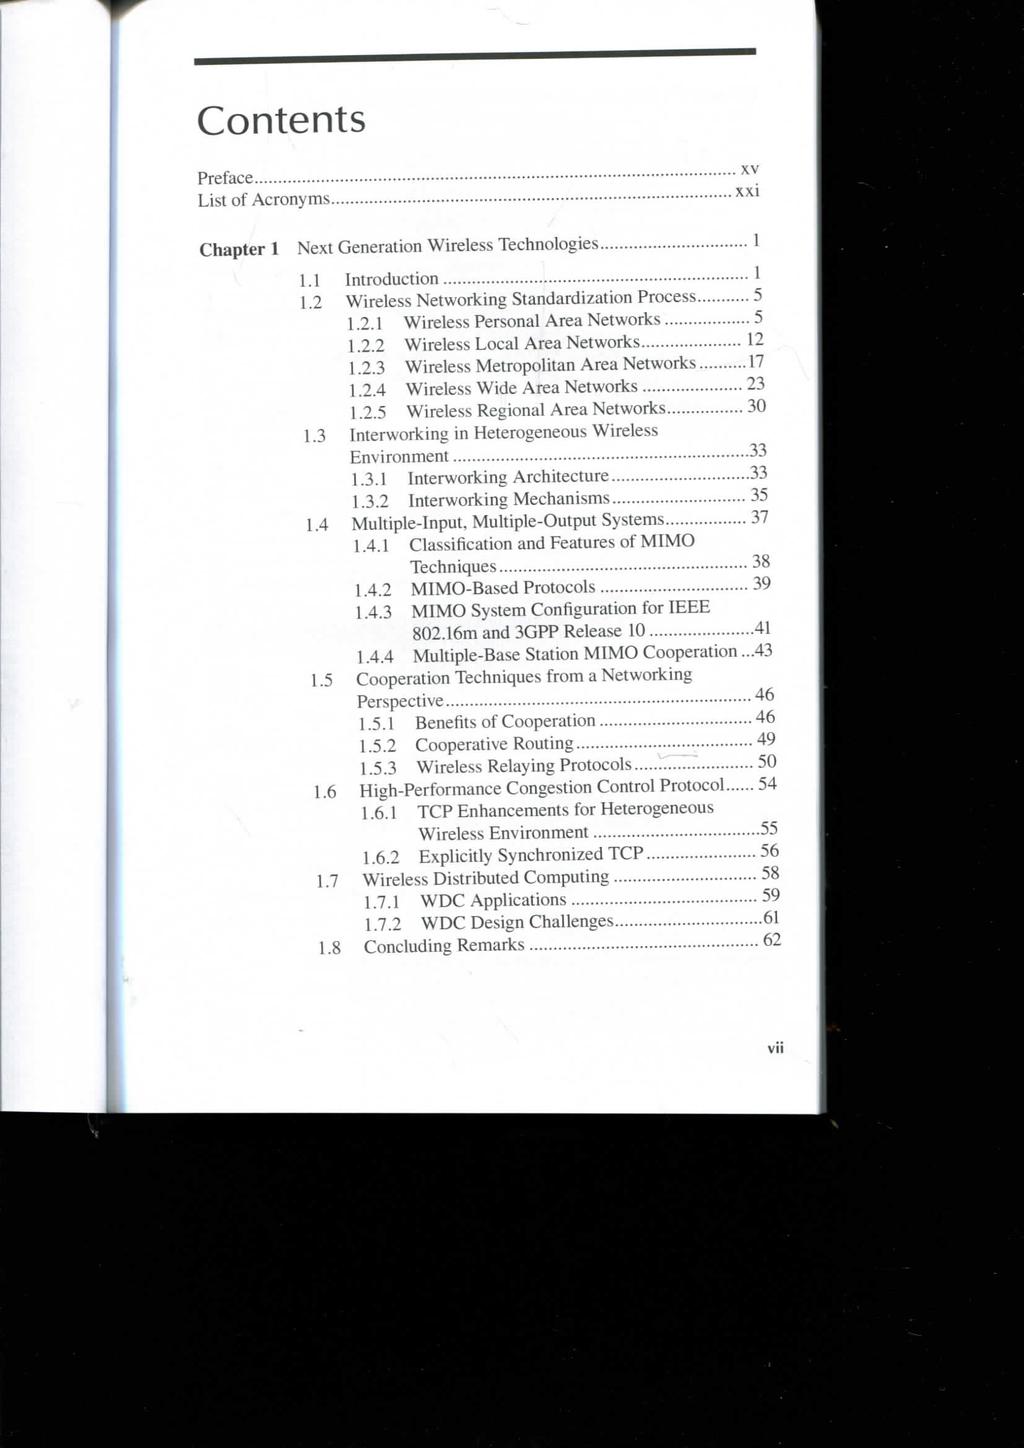 Contents Preface List of Acronyms xxi Chapter 1 Next Generation Wireless Technologies 1 1.1 Introduction 1 1.2 Wireless Networking Standardization Process 5 1.2.1 Wireless Personal Area Networks 5 1.